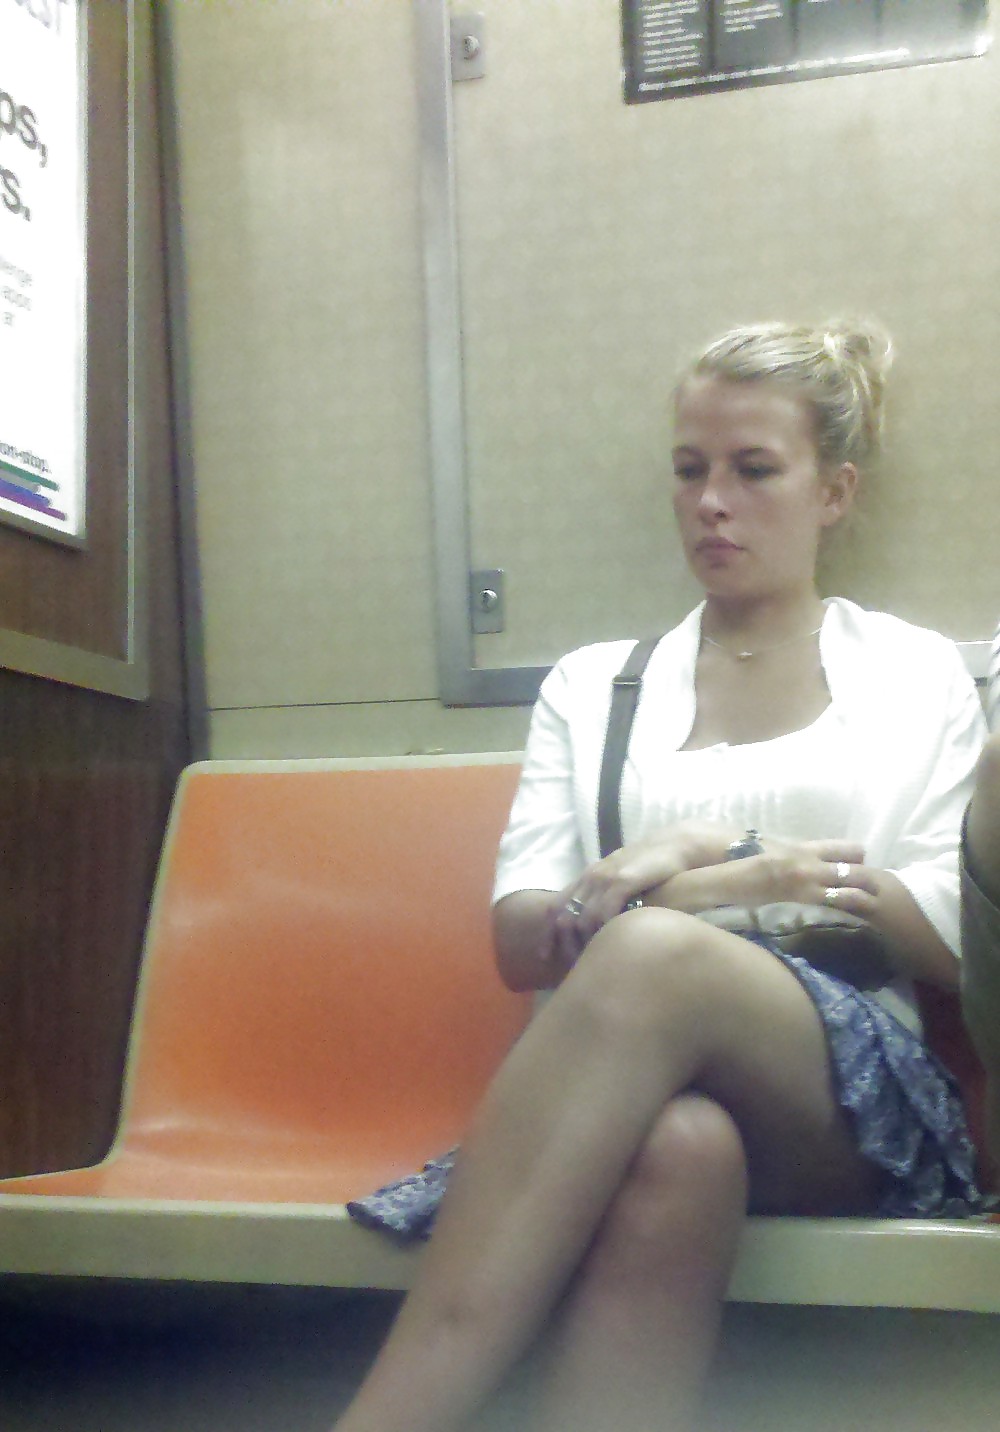 New York Subway Girls Compilation 1 - Legs and Thighs #6590207